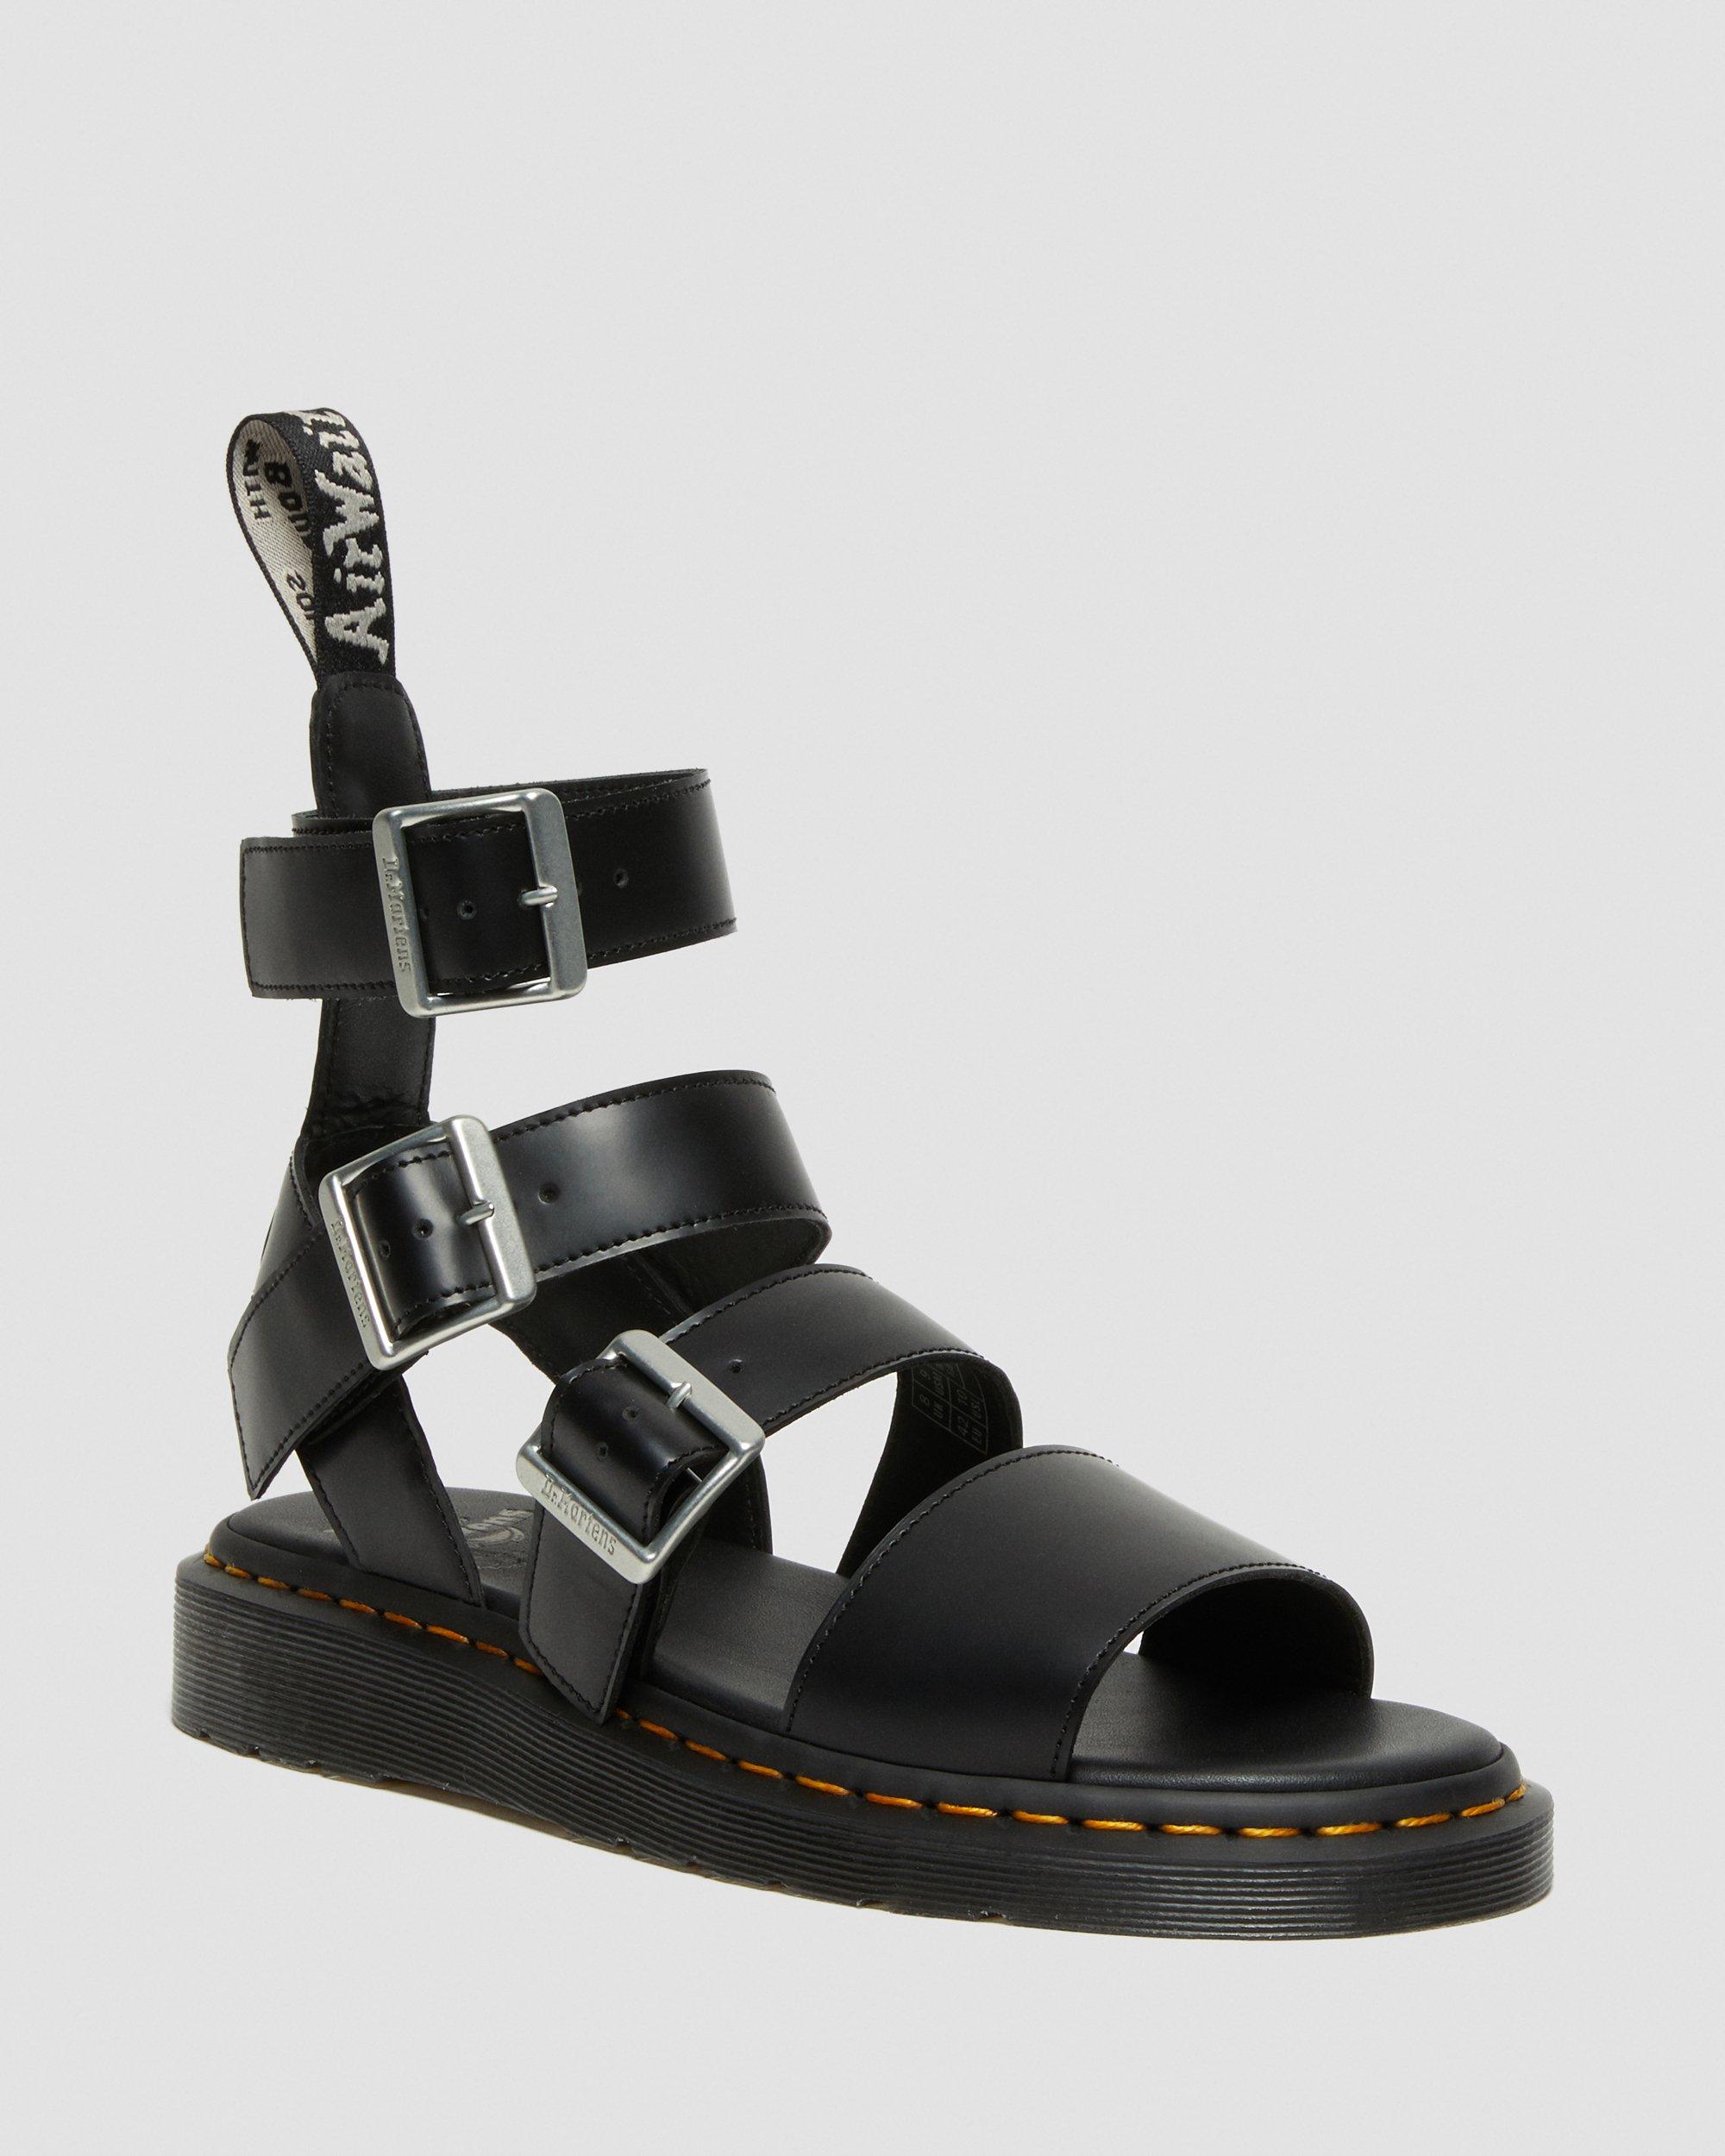 Dr Martens Womens Gladiator with Ankle-tie Sandal